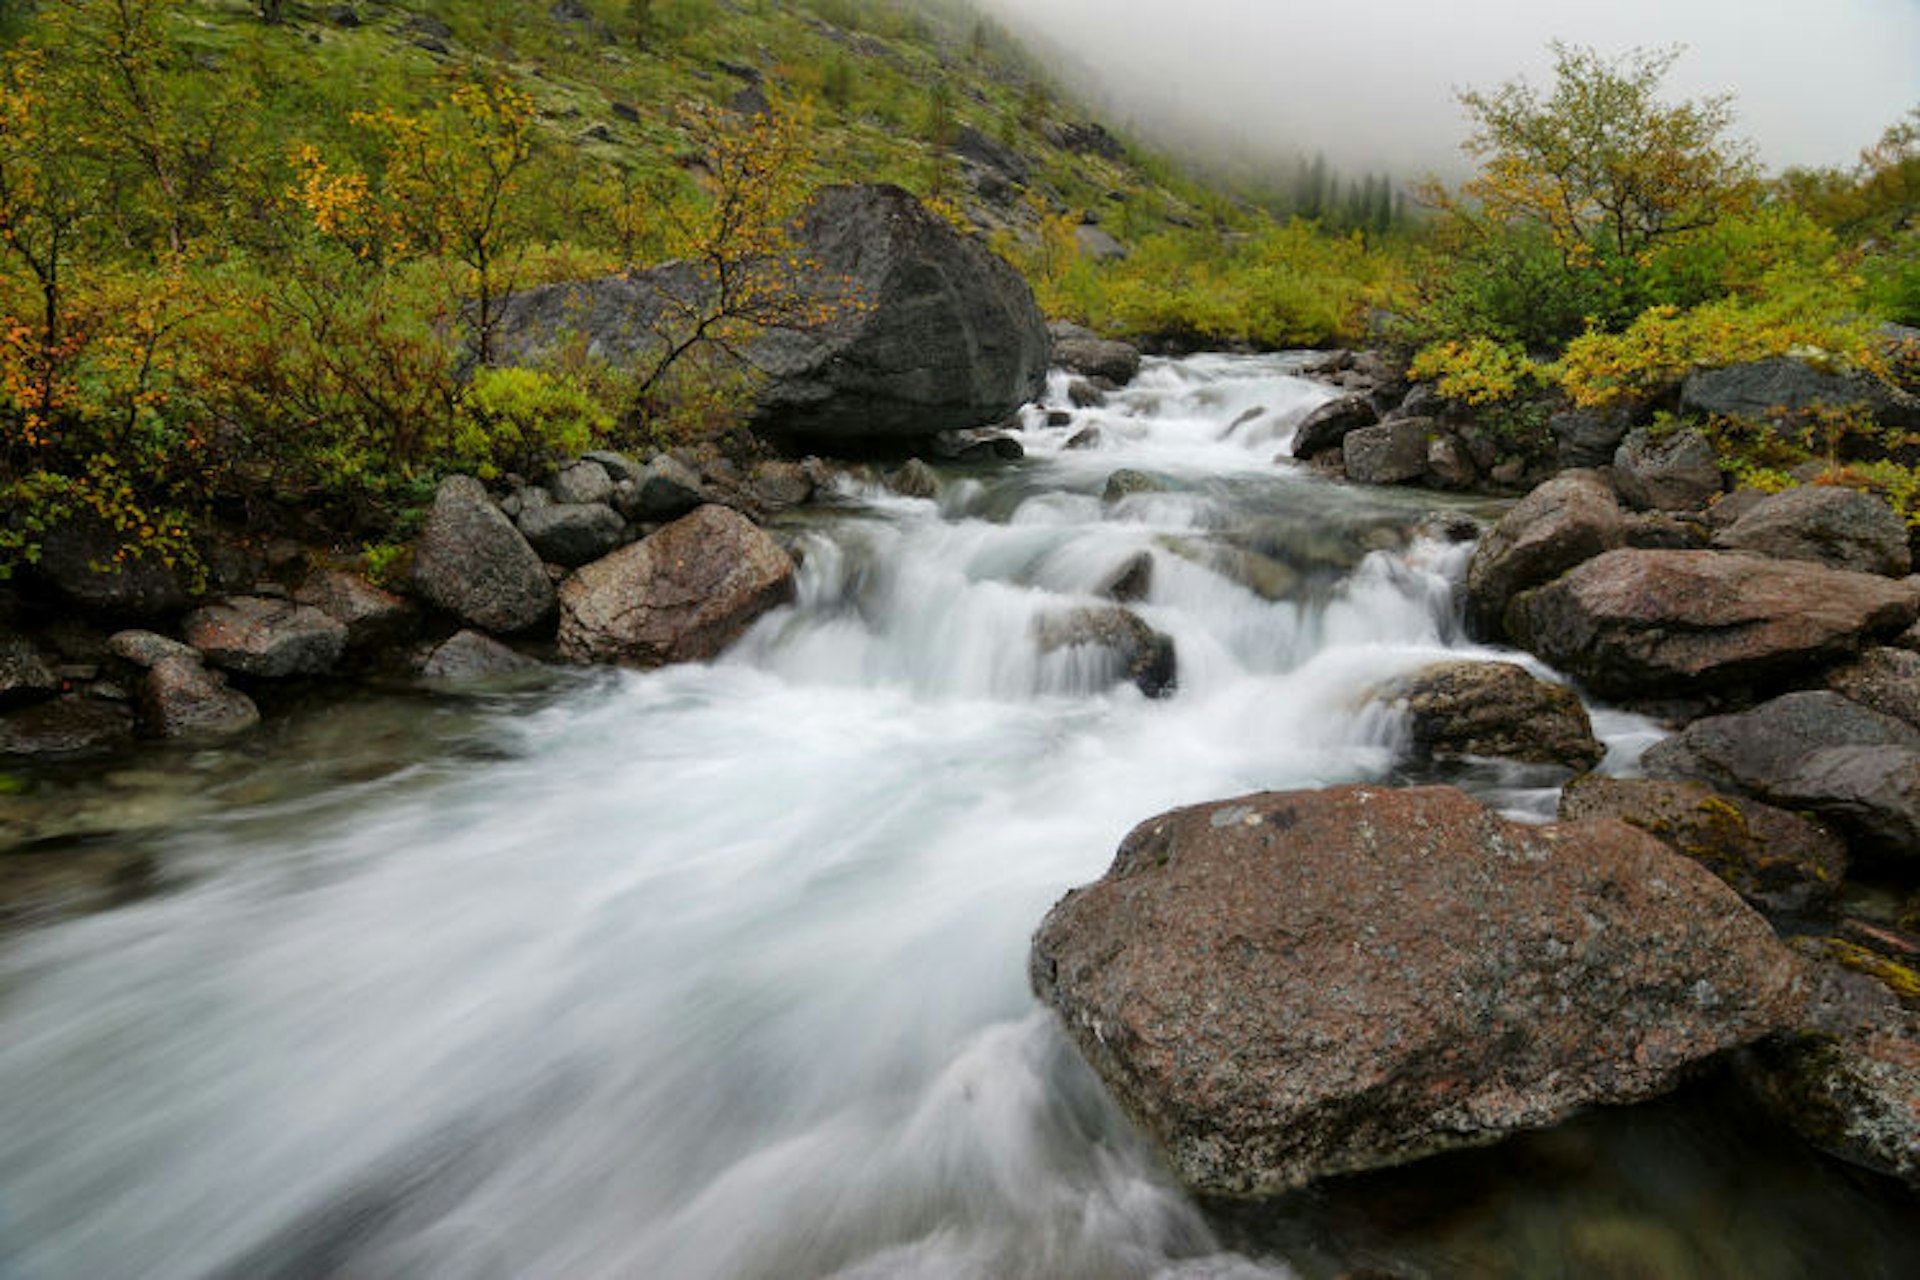 Fast mountain stream in Khibiny Mountains. Image by Yevgen Timashov / Getty Images